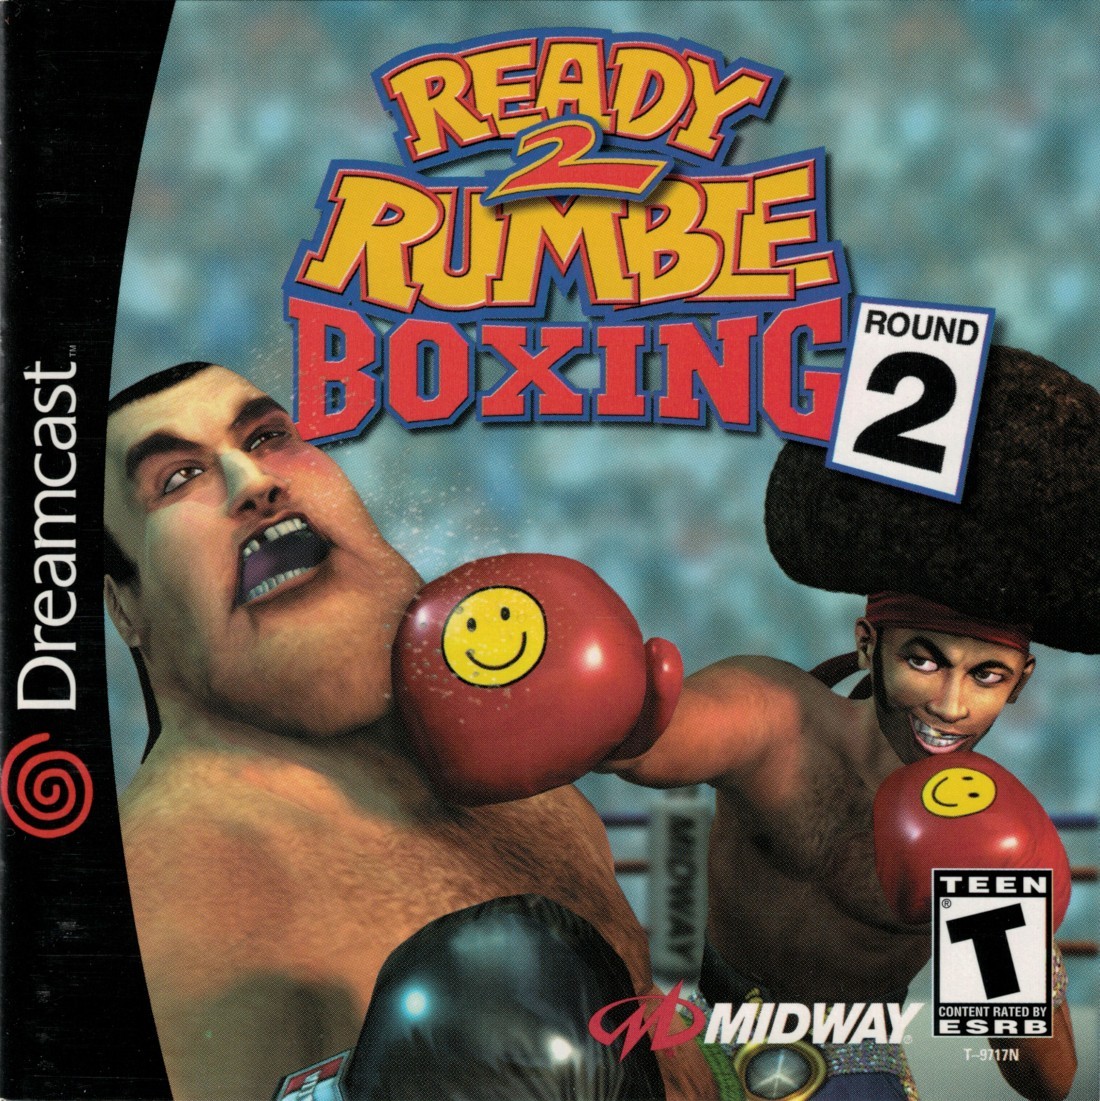 Ready 2 Rumble Boxing: Round 2 cover